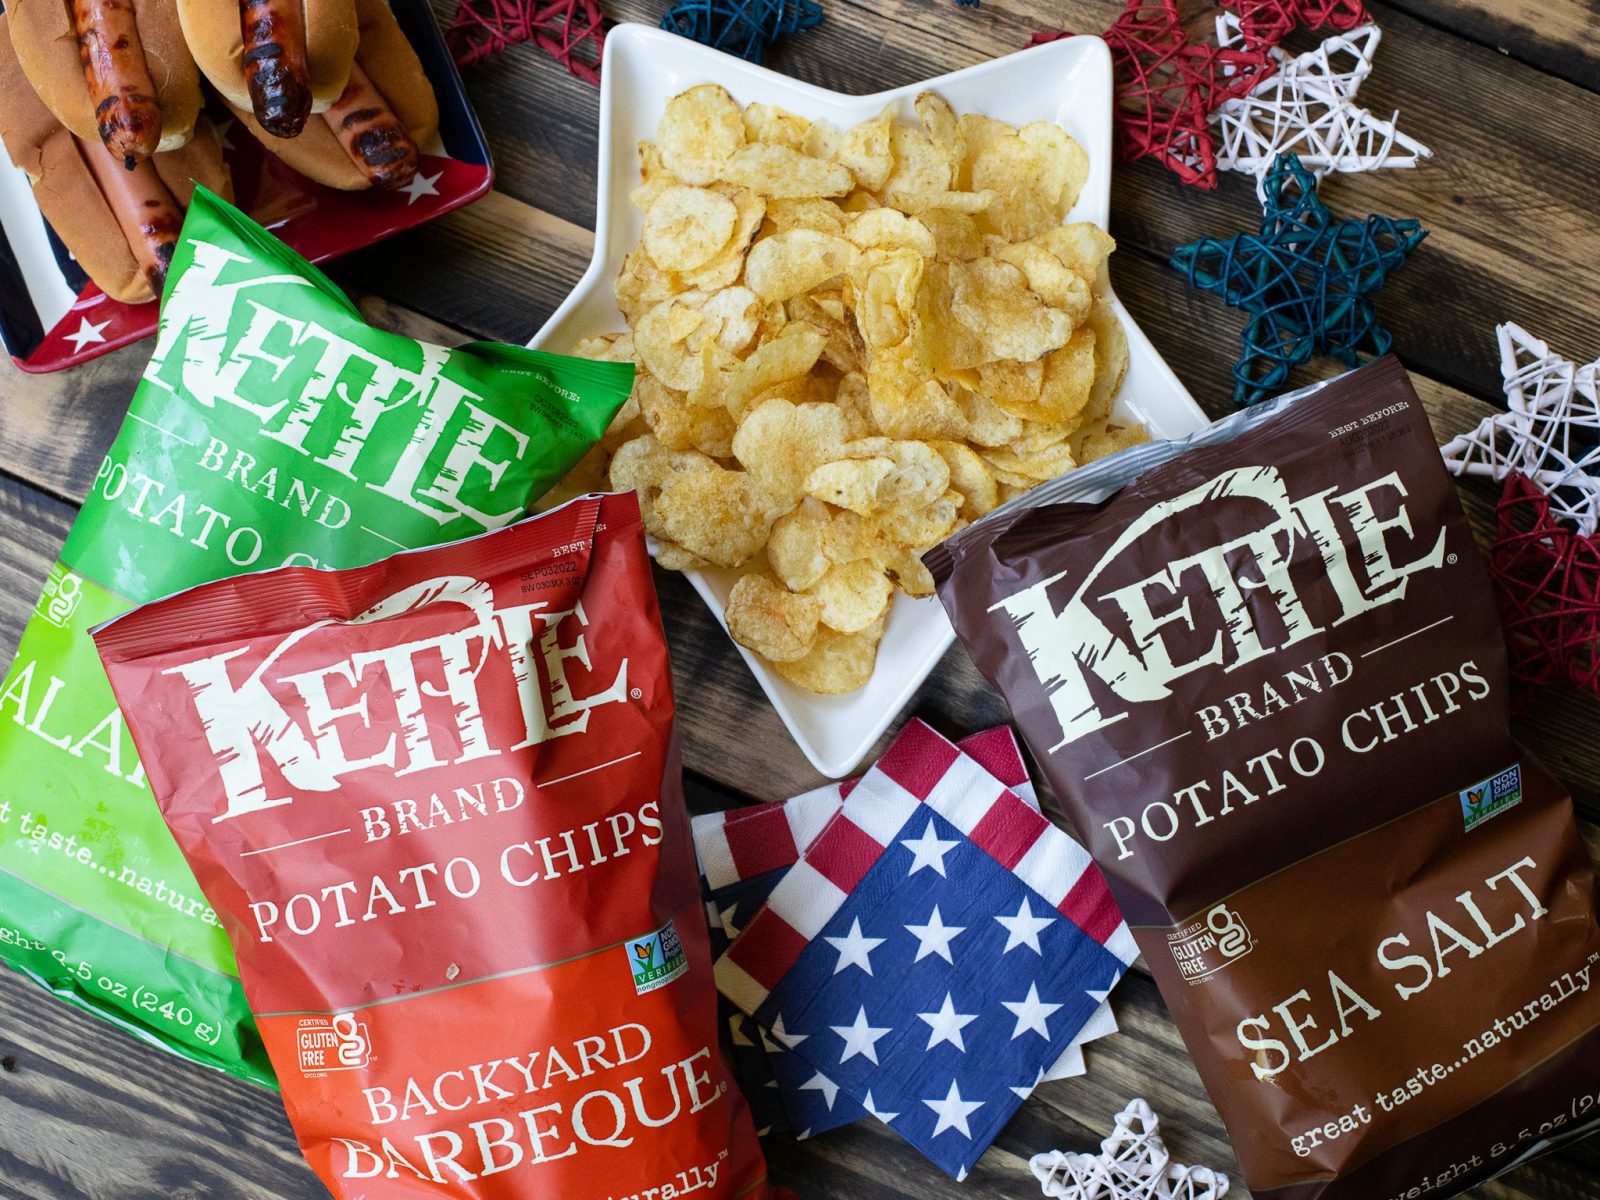 Pick Up Delicious Kettle Brand Chips For Your Summer Gatherings – Get Flavor That’s Bold!